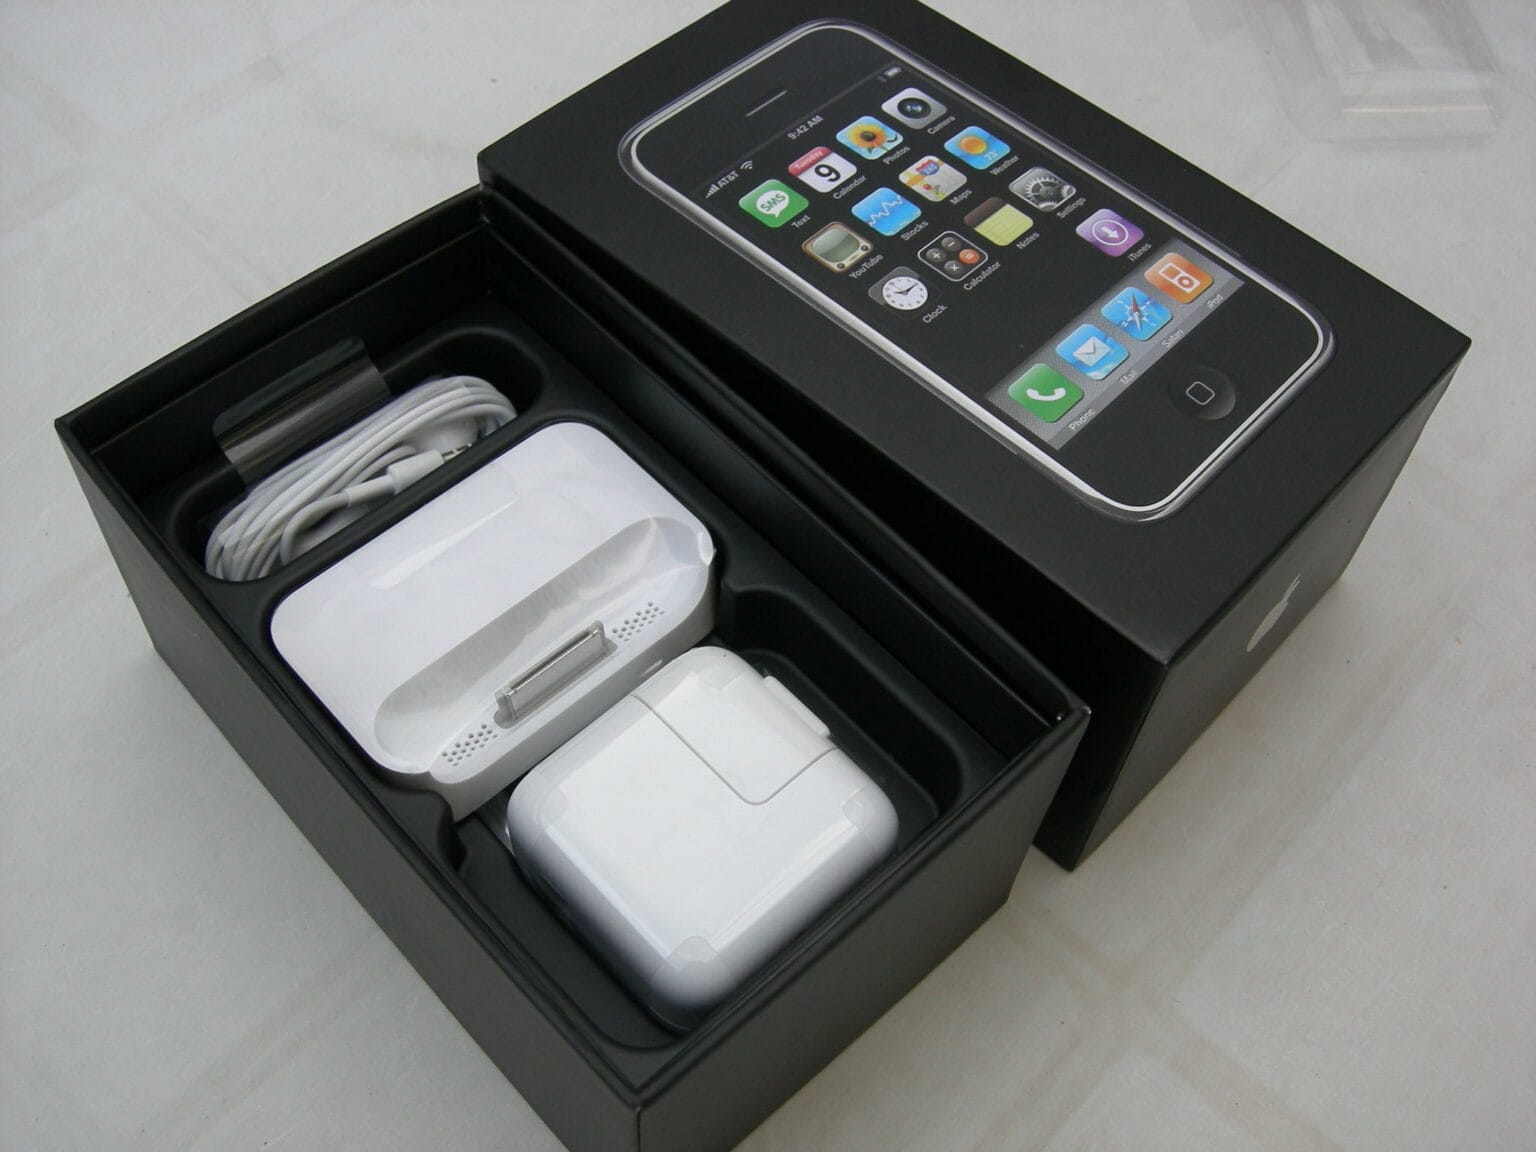 Original iPhone unboxing with charger